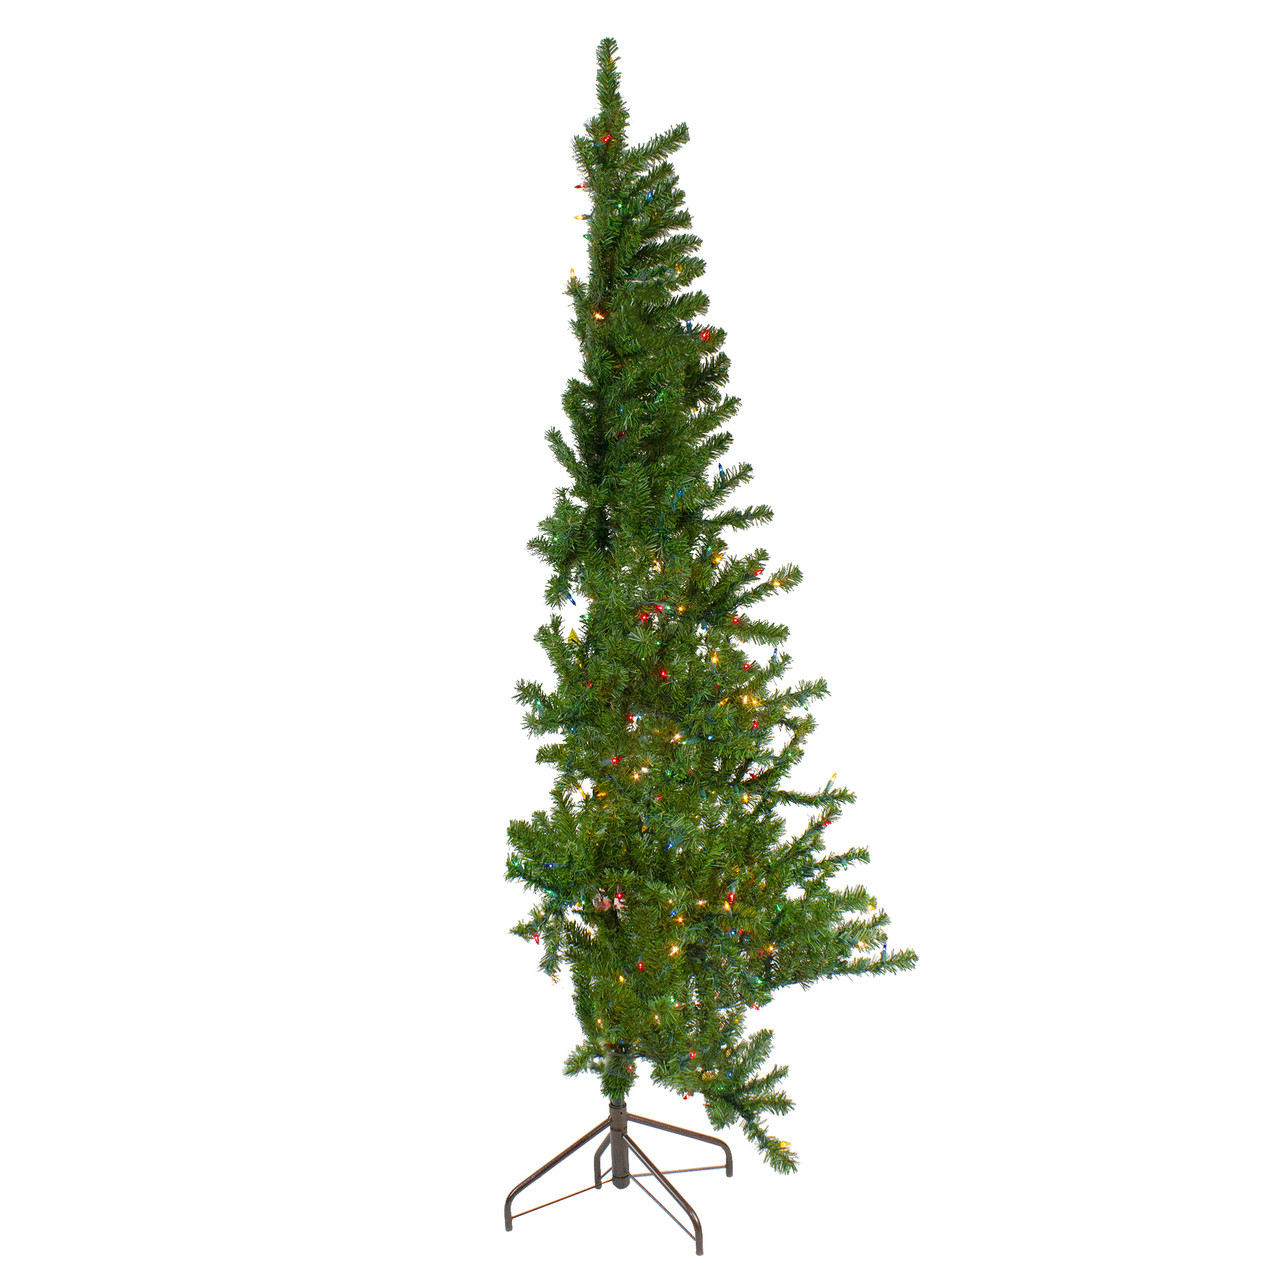 How to Pick the Best Artificial Christmas Tree for Your Holiday Display